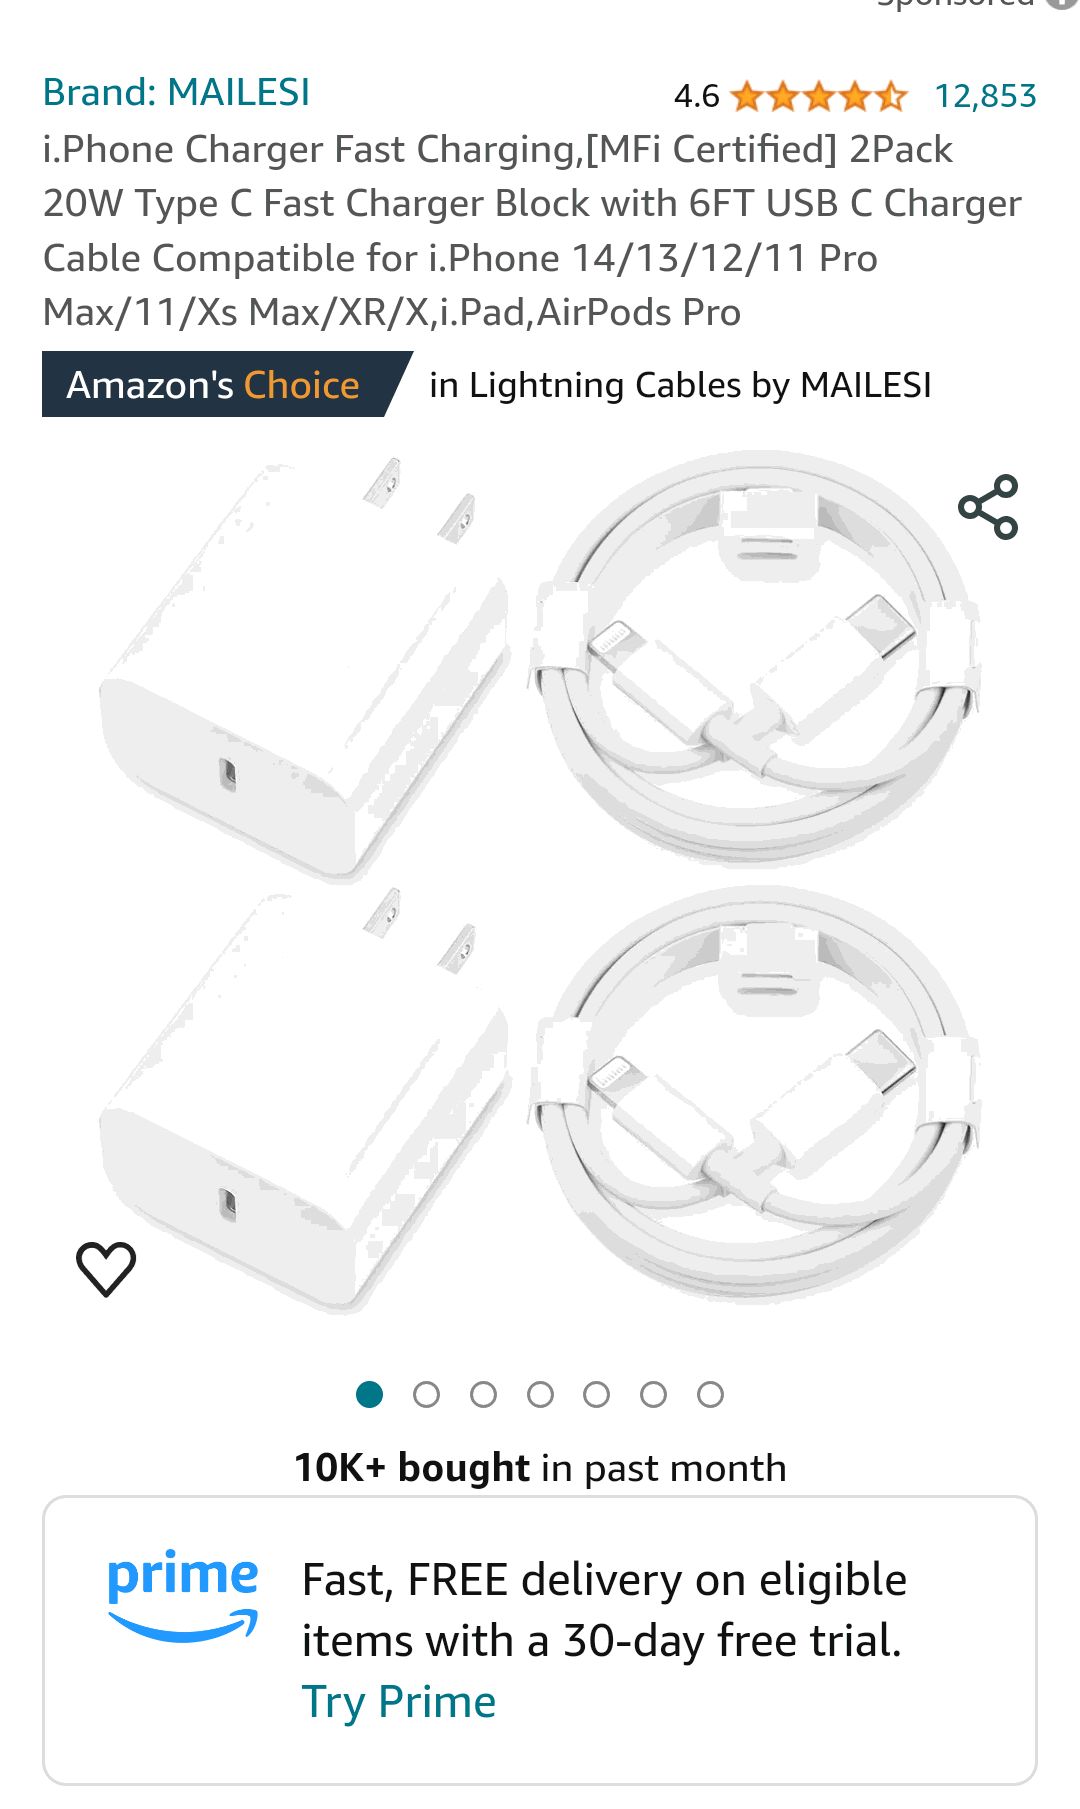 i.Phone Charger Fast Charging,[MFi Certified] 2Pack 20W Type C Fast Charger Block with 6FT USB C Charger Cable Compatible for i.Phone 14/13/12/11 Pro Max/11/Xs Max/XR/X,i.Pad,AirPods Pro : Electronics